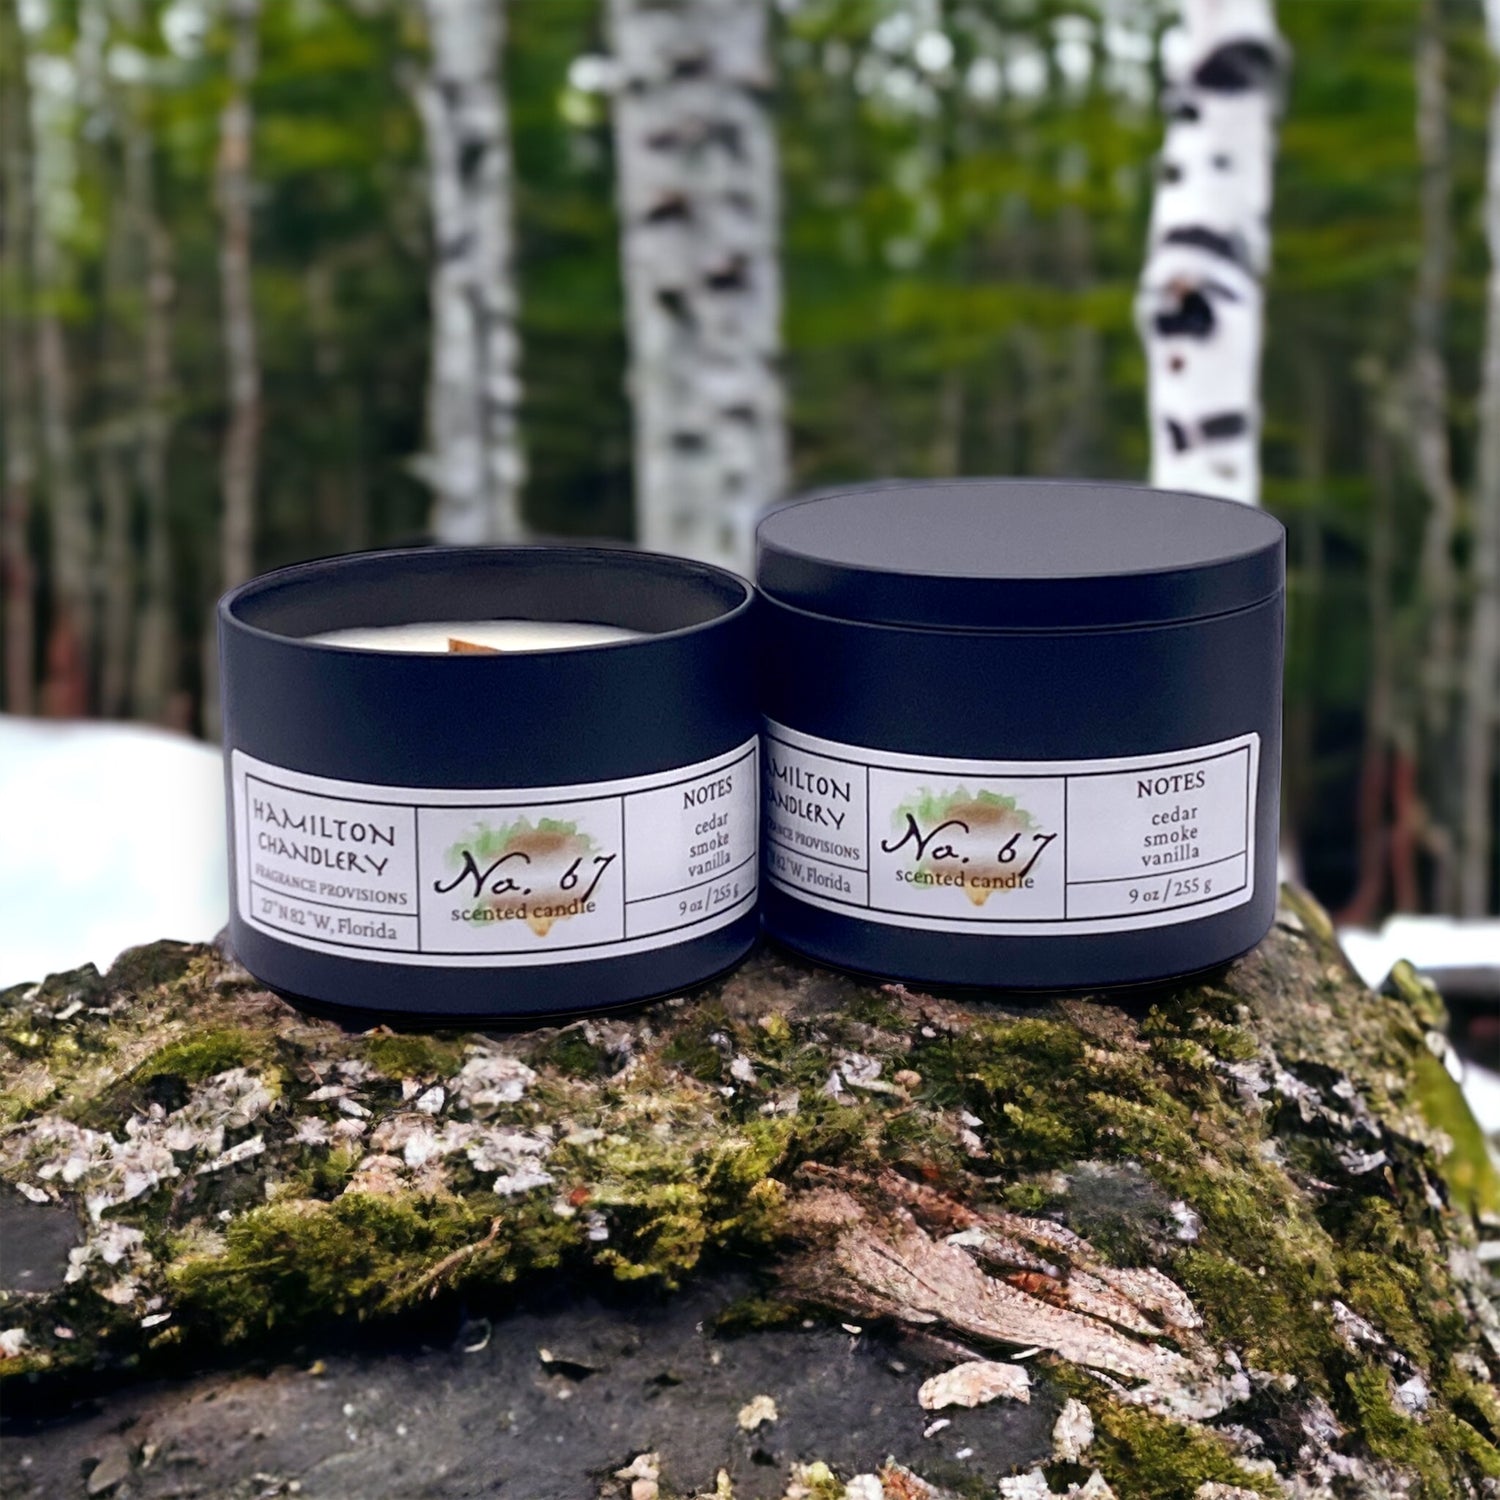 Fragrance No. 67 Travel Tin Candle on Moss Ledge with Birch Trees in Background | Hamilton Chandlery